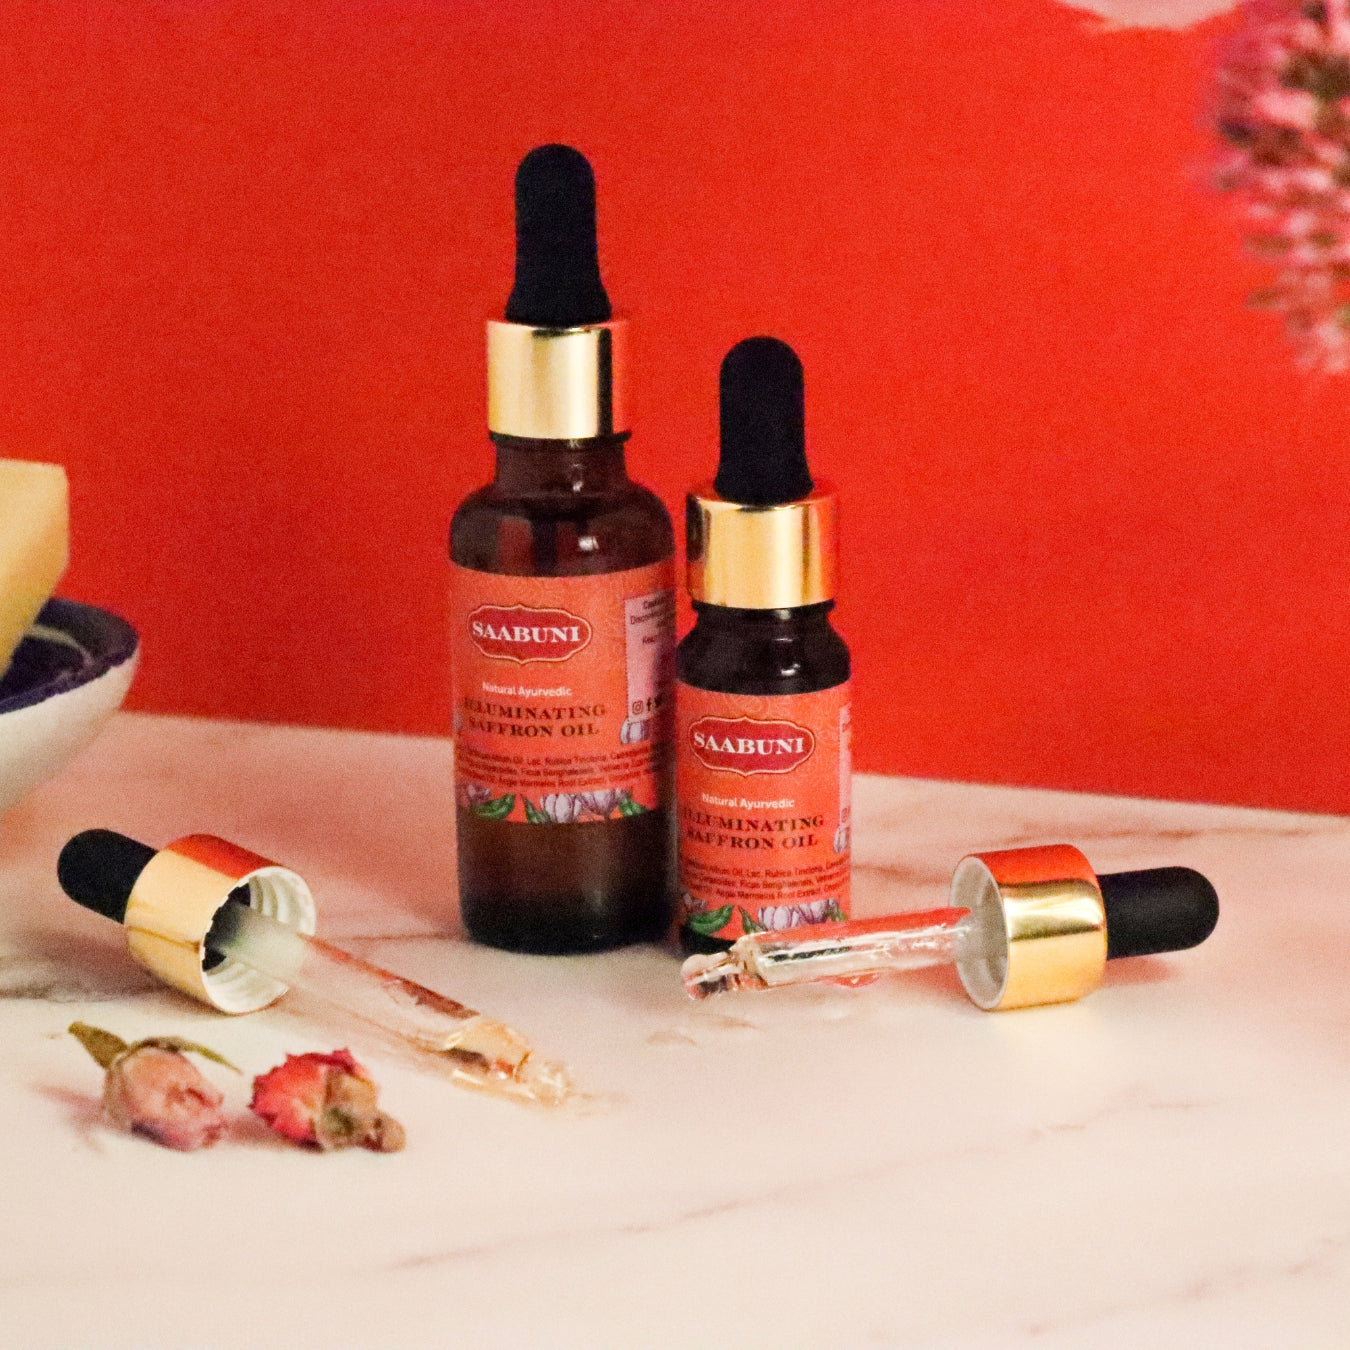 Use the Saffron serum as part of your skincare routine